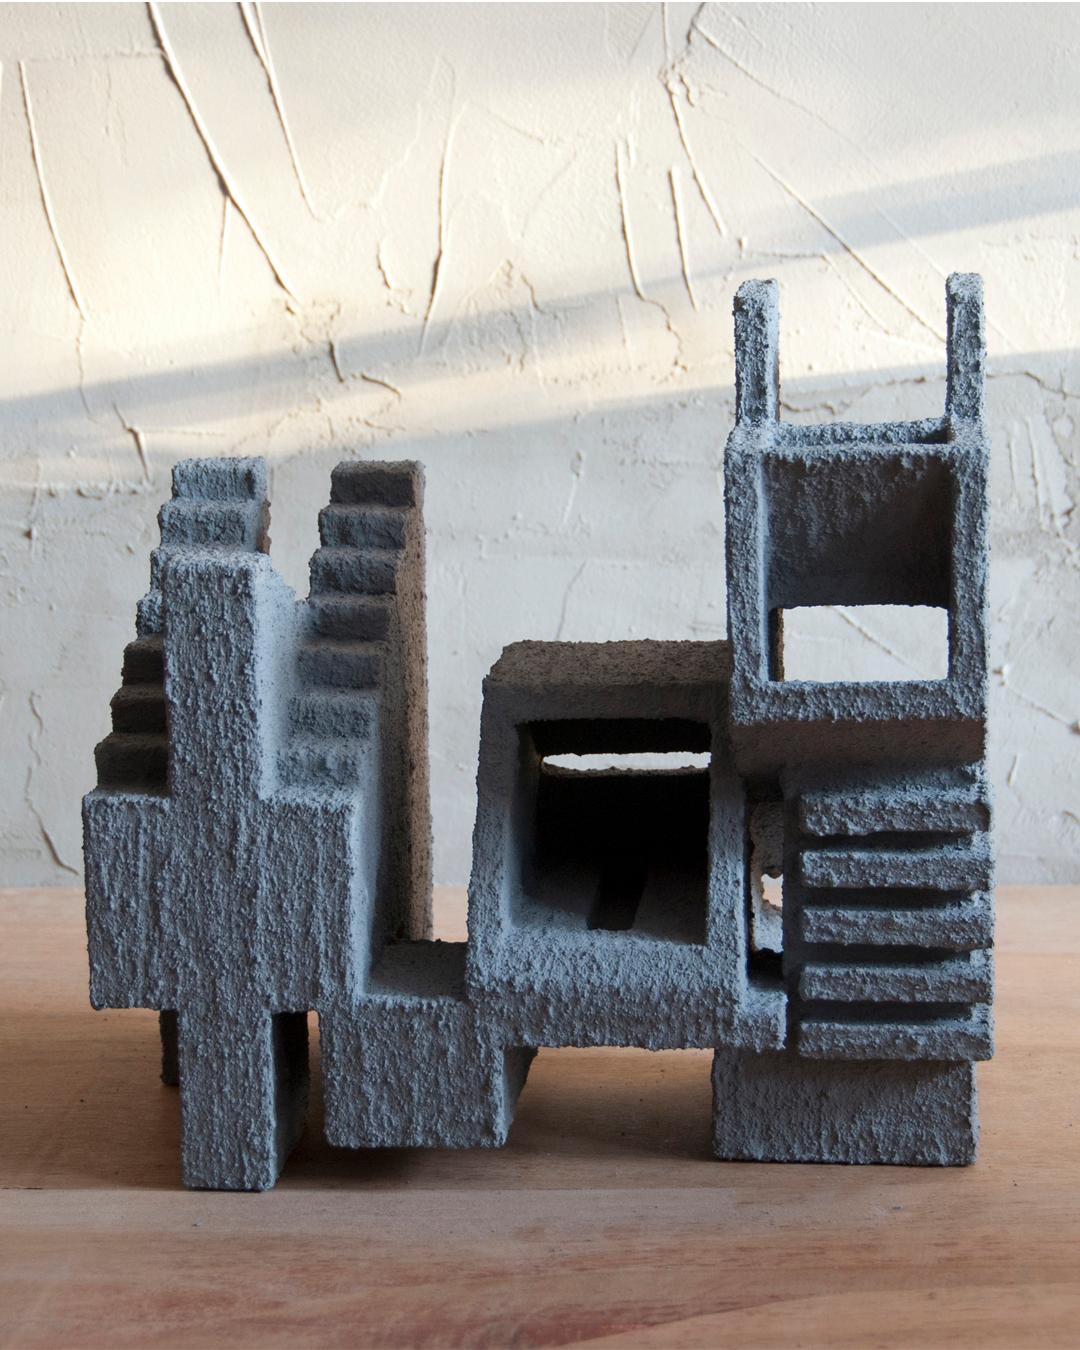 Hand-Crafted Sculpture Contemporary Geometric Constructivist Wood Concrete Grey - The Dog For Sale